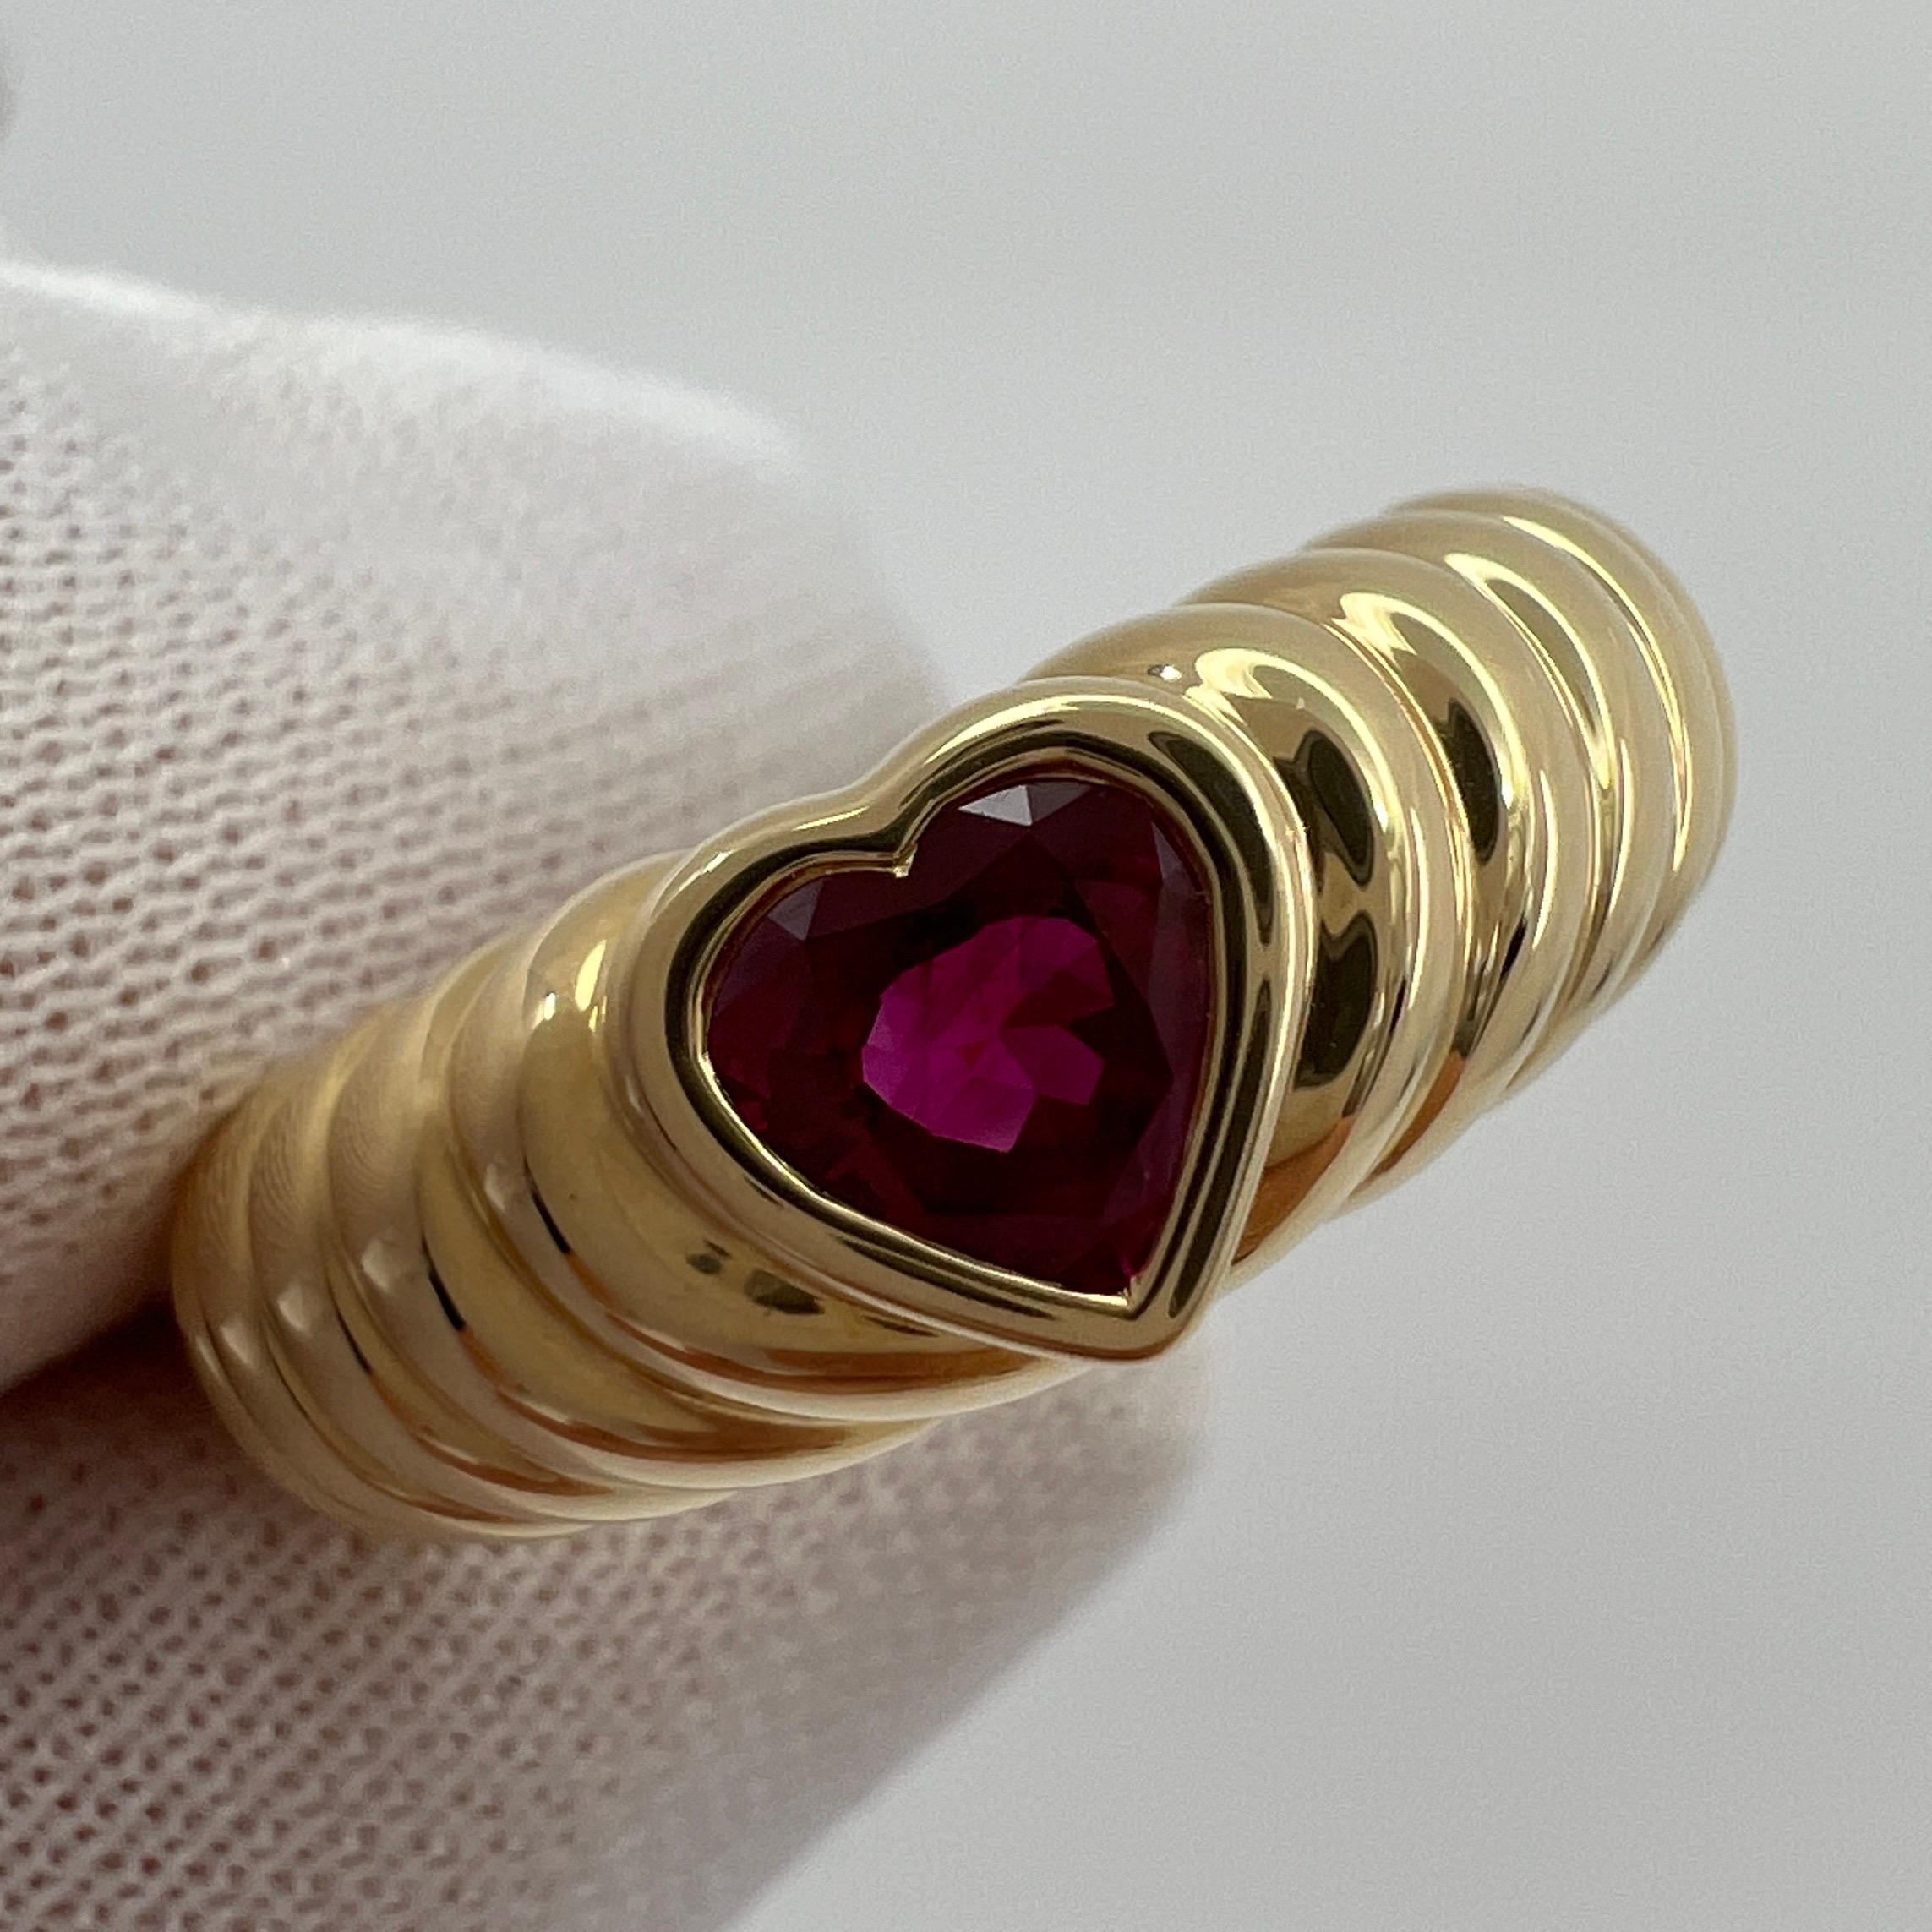 Rare Tiffany & Co. Vivid Blood Red Ruby Heart Cut 18k Yellow Gold Band Ring.

A beautifully made yellow gold ring set with a stunning vivid blood red heart cut ruby. Superb colour, clarity and cut. Fine jewellery houses like Tiffany only use the